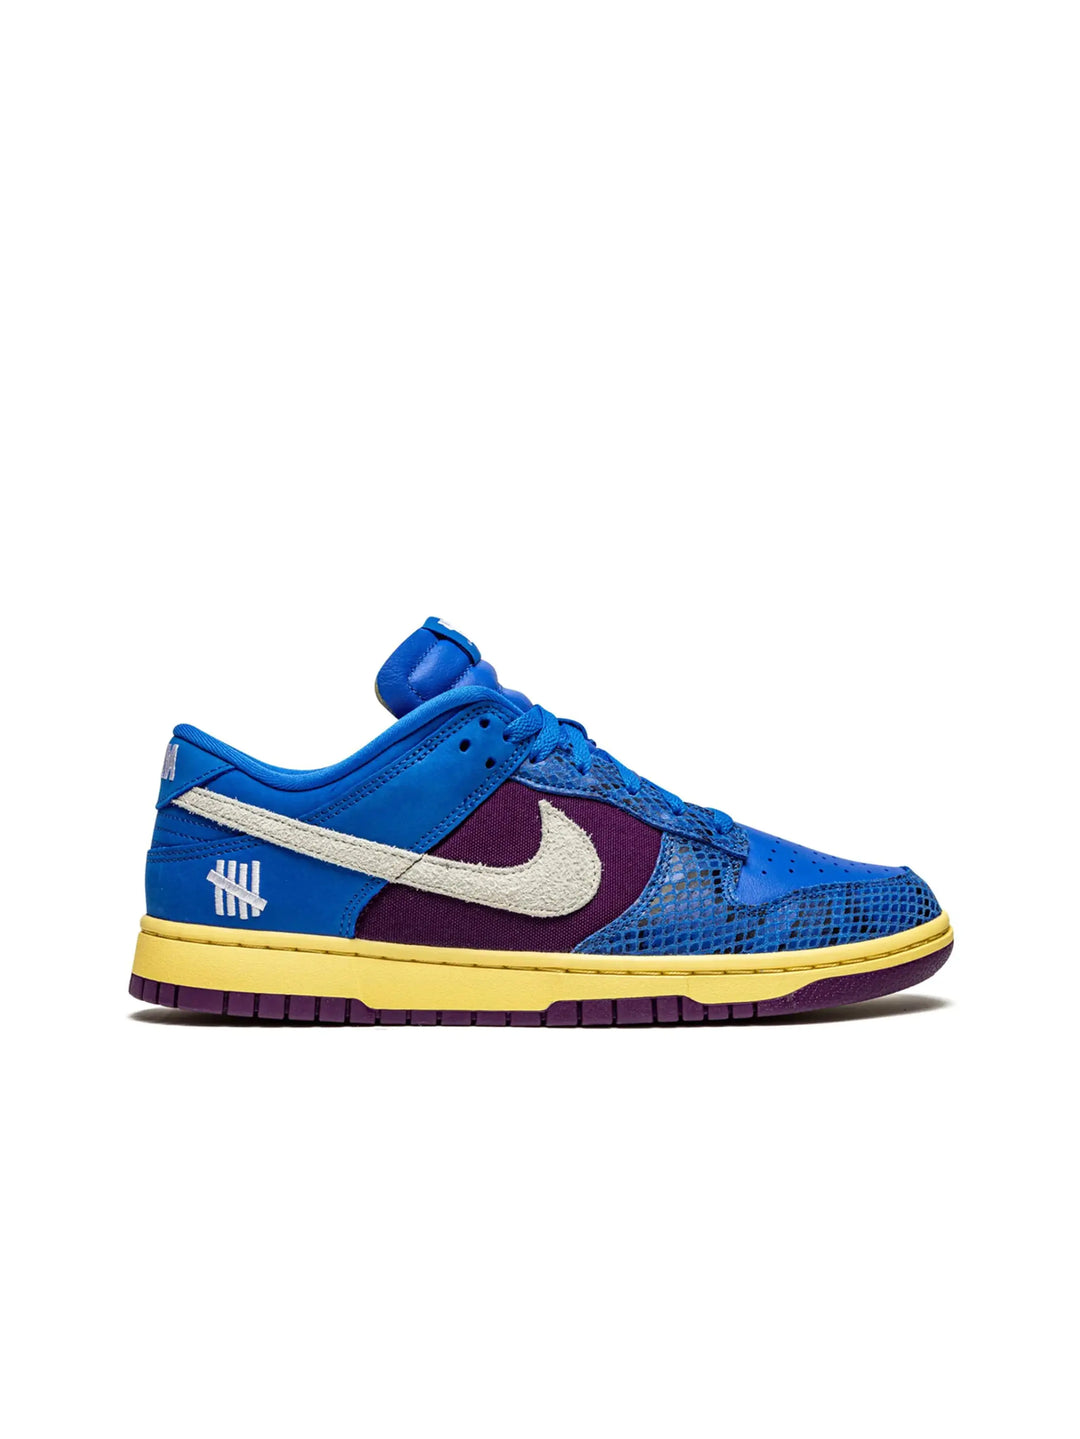 Nike Dunk Low Undefeated 5 On It Dunk vs. AF1 in Auckland, New Zealand - Shop name